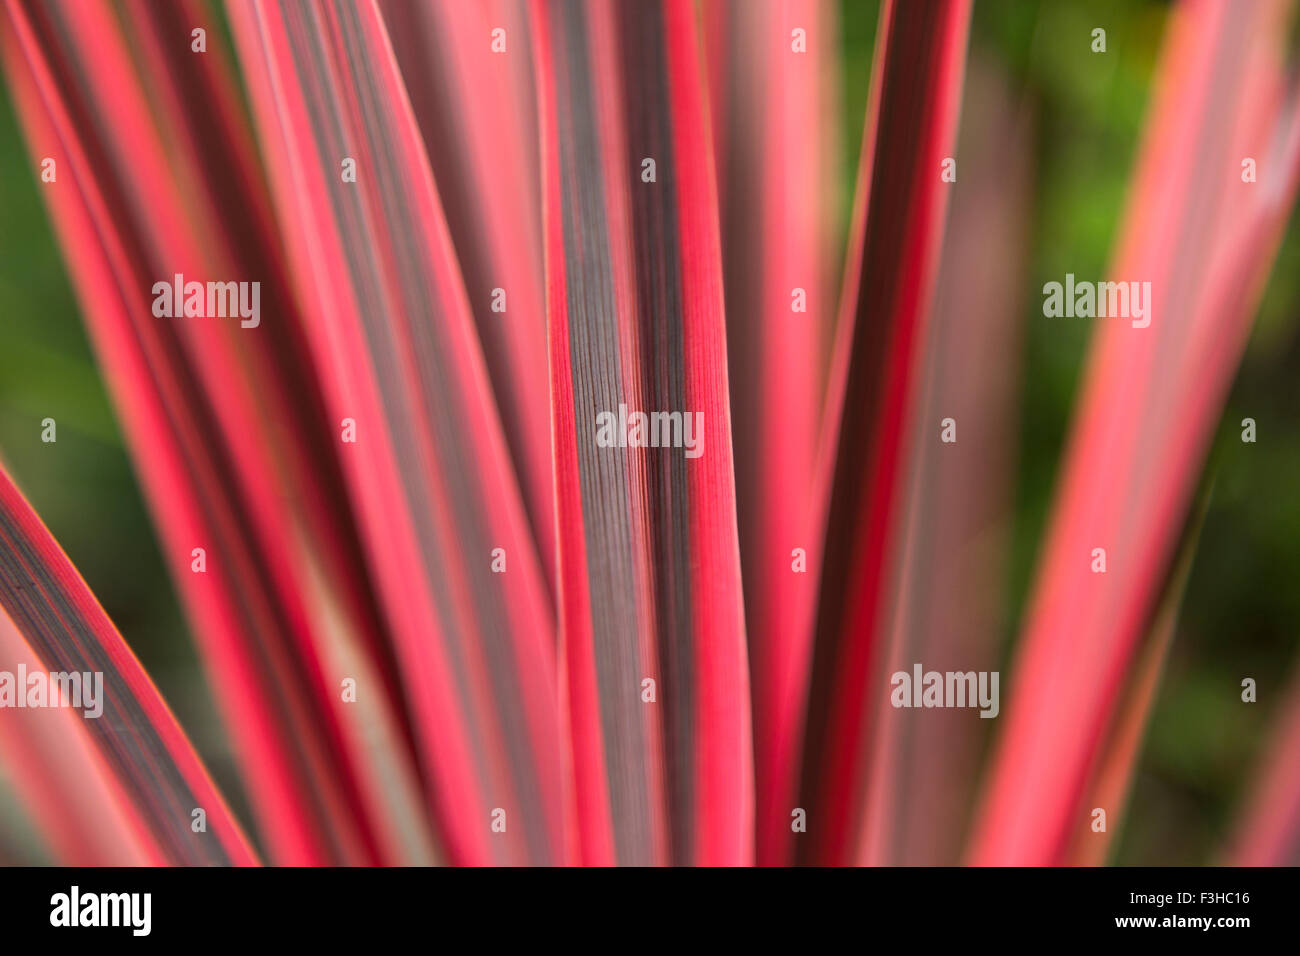 Cordyline australis 'Pink Passion' Cabbage Palm closeup of leaves Stock Photo